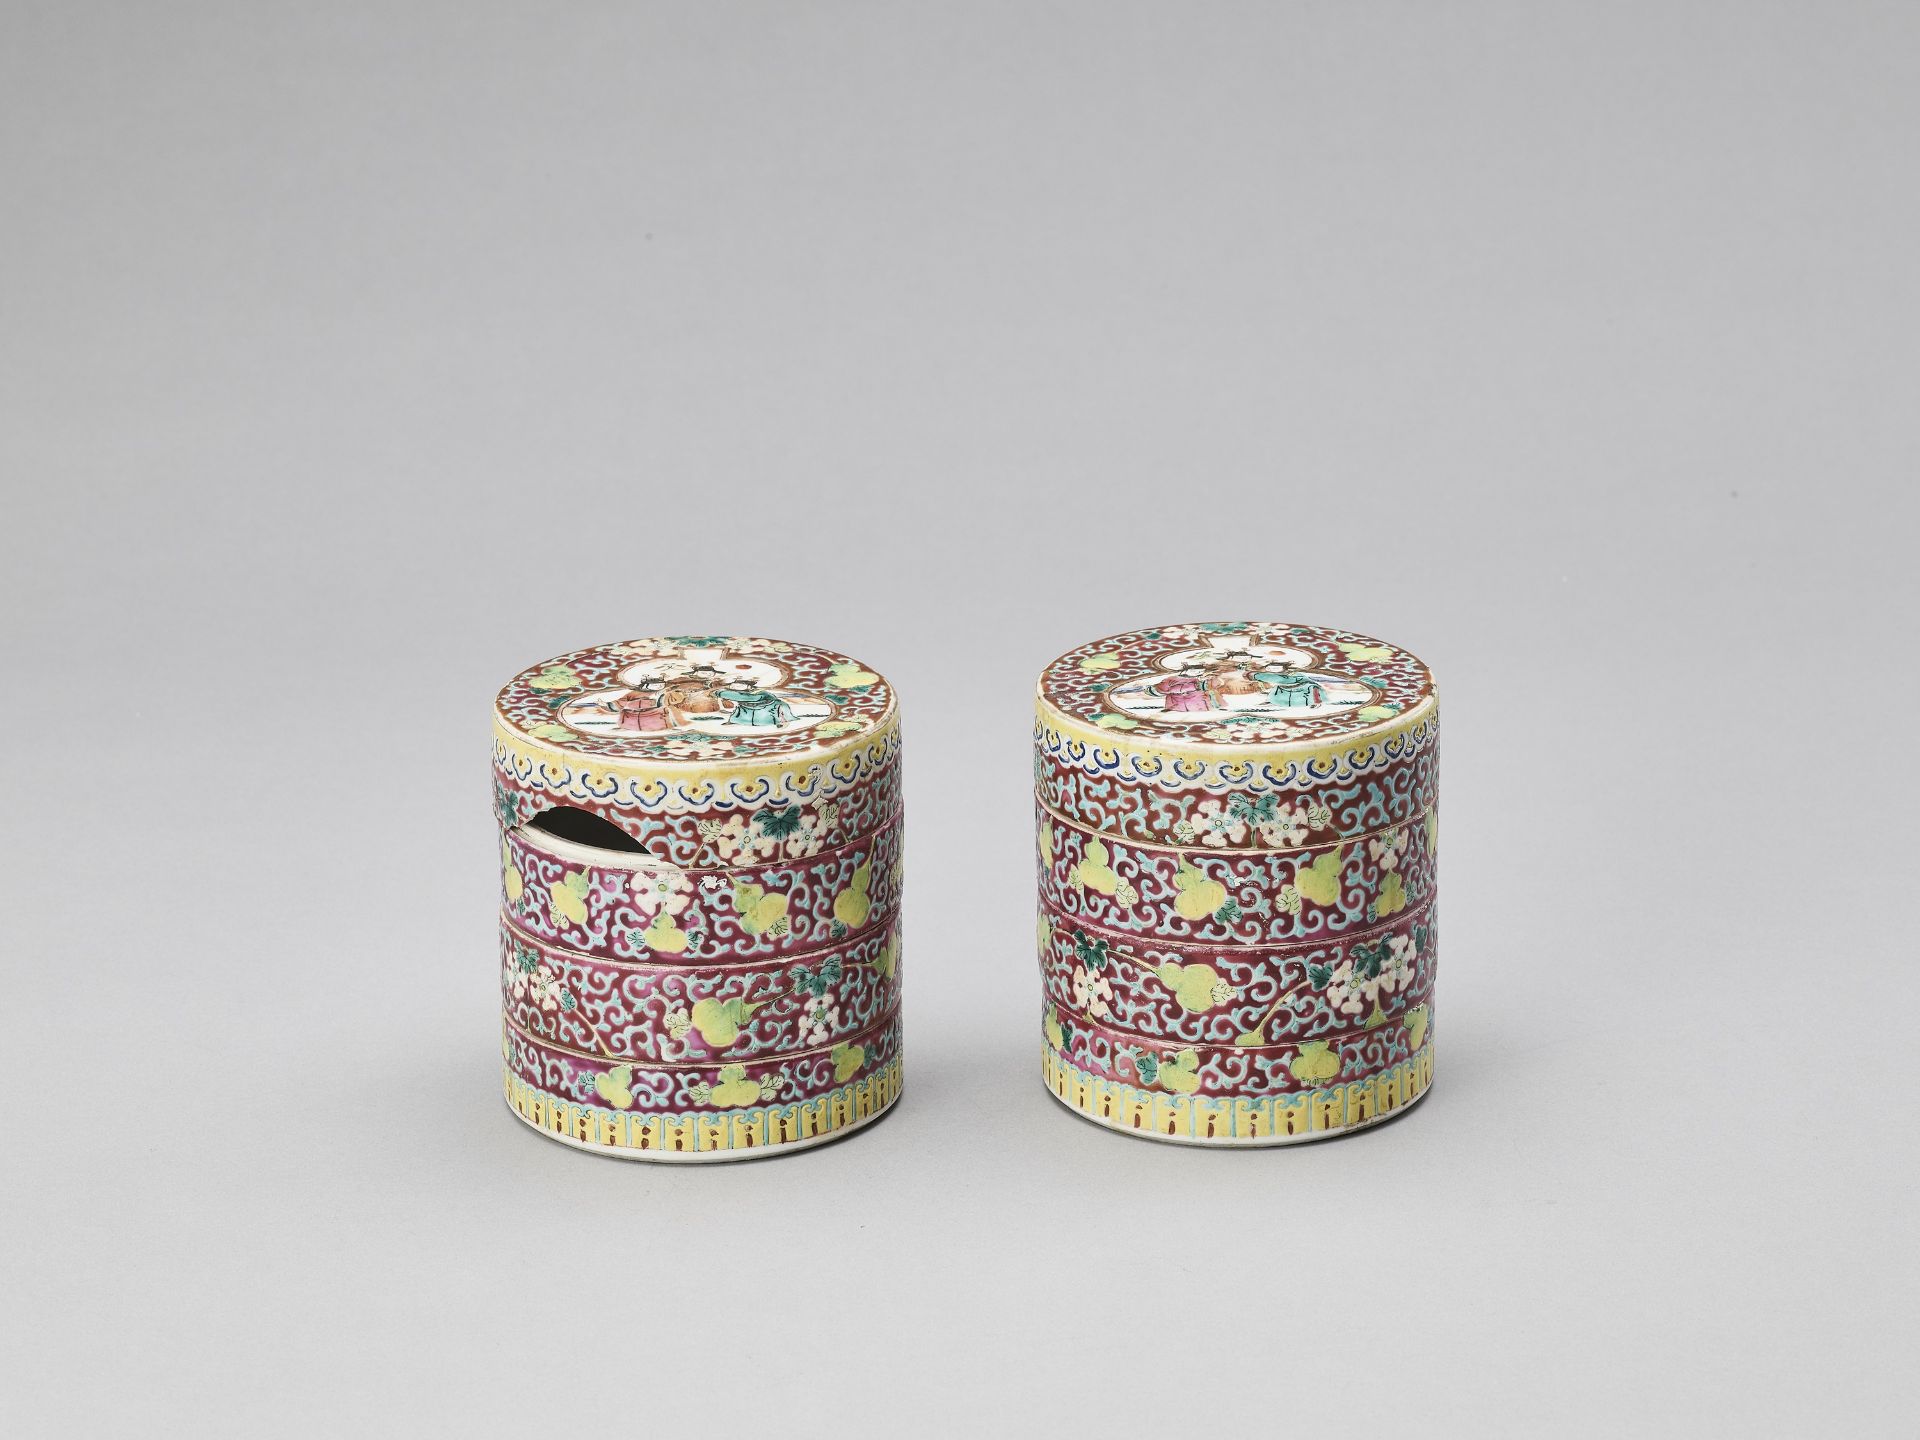 A PAIR OF THREE-TIERED ENAMELED PORCELAIN COSMETIC BOXES, REPUBLIC - Bild 6 aus 10